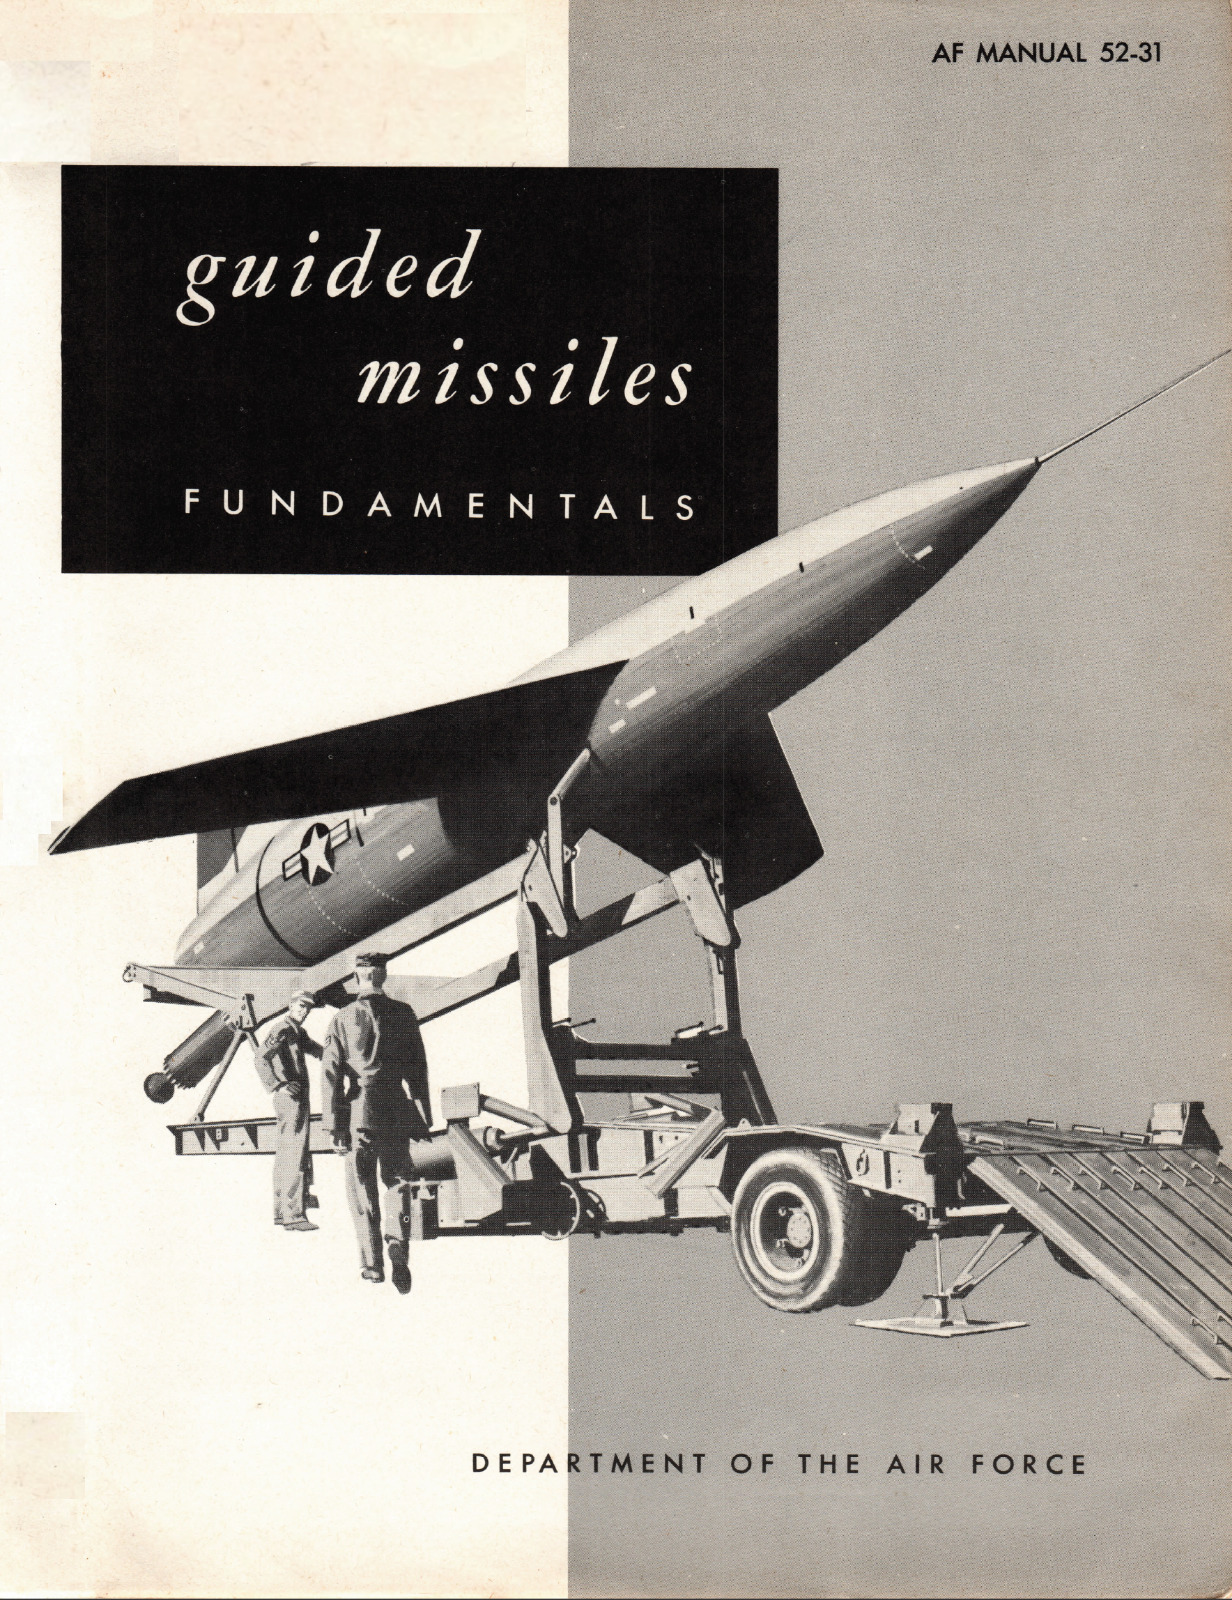 581 Page 1957 AIR FORCE MANUAL 52-31 GUIDED MISSILES FUNDAMENTALS on Data CD